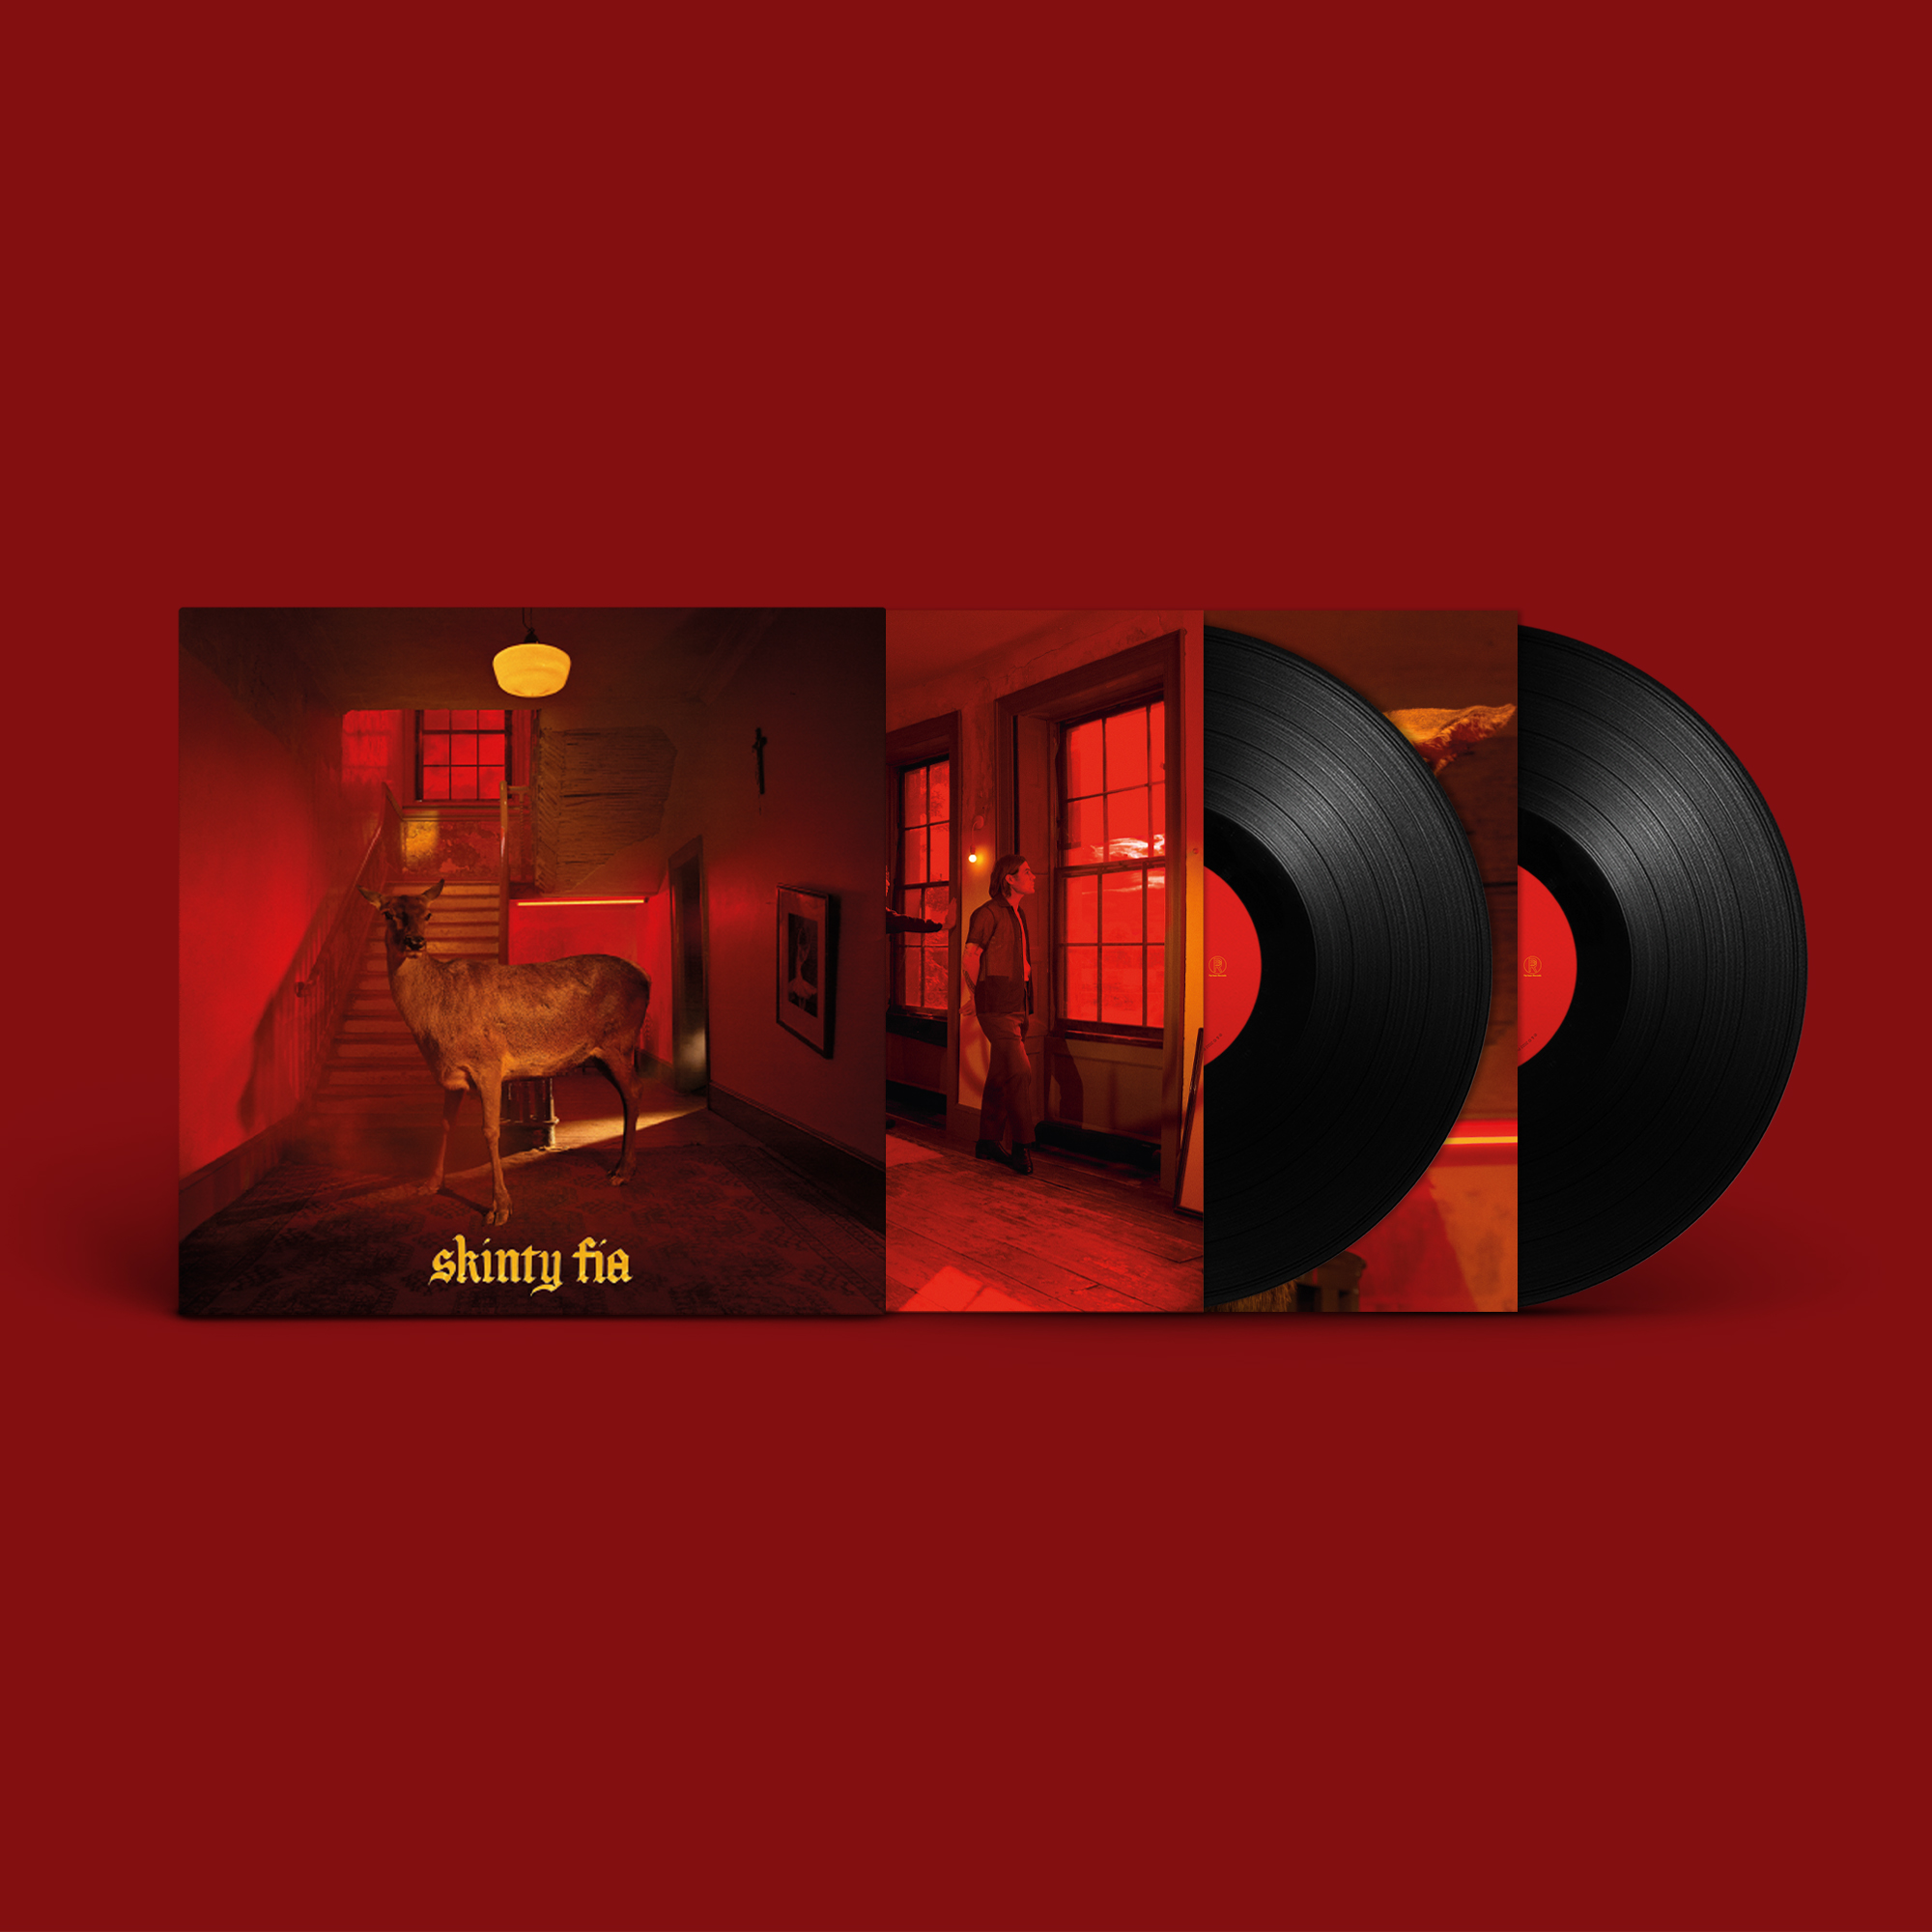 Fontaines D.C. "Skinty Fia" Deluxe 2LP